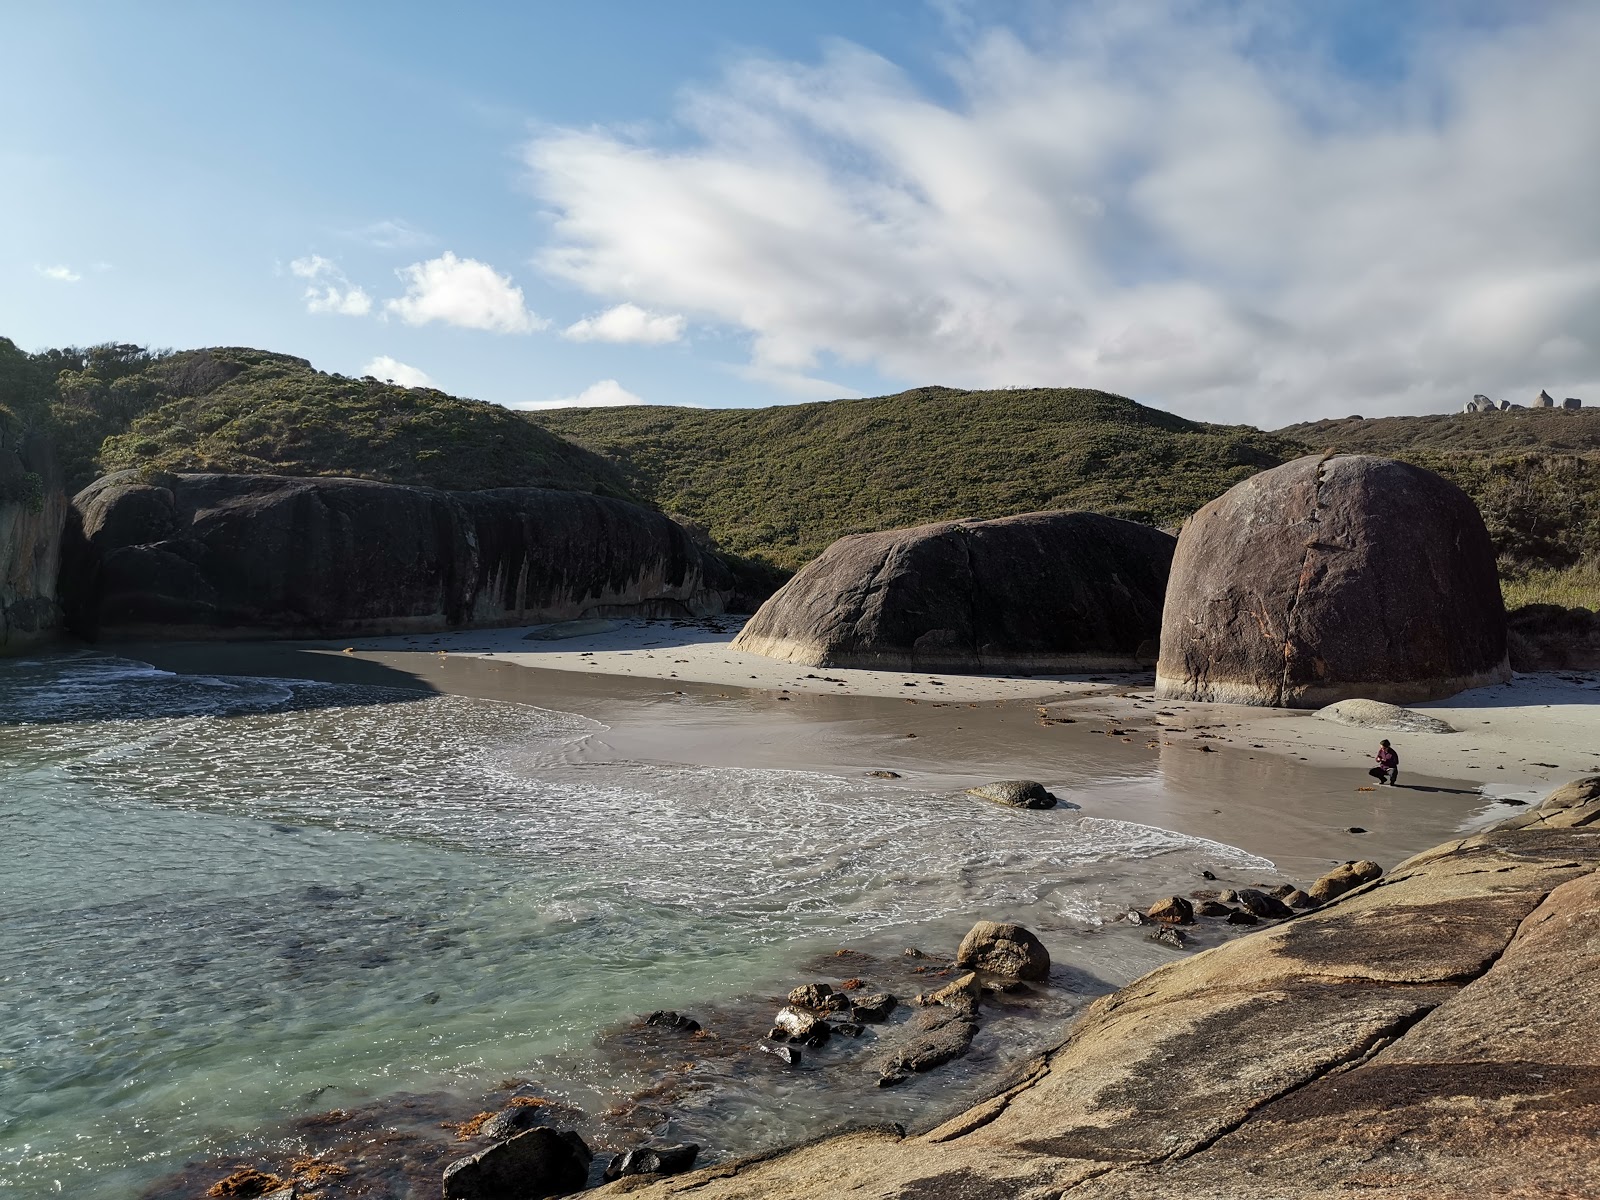 Photo of Elephant Rocks Beach located in natural area